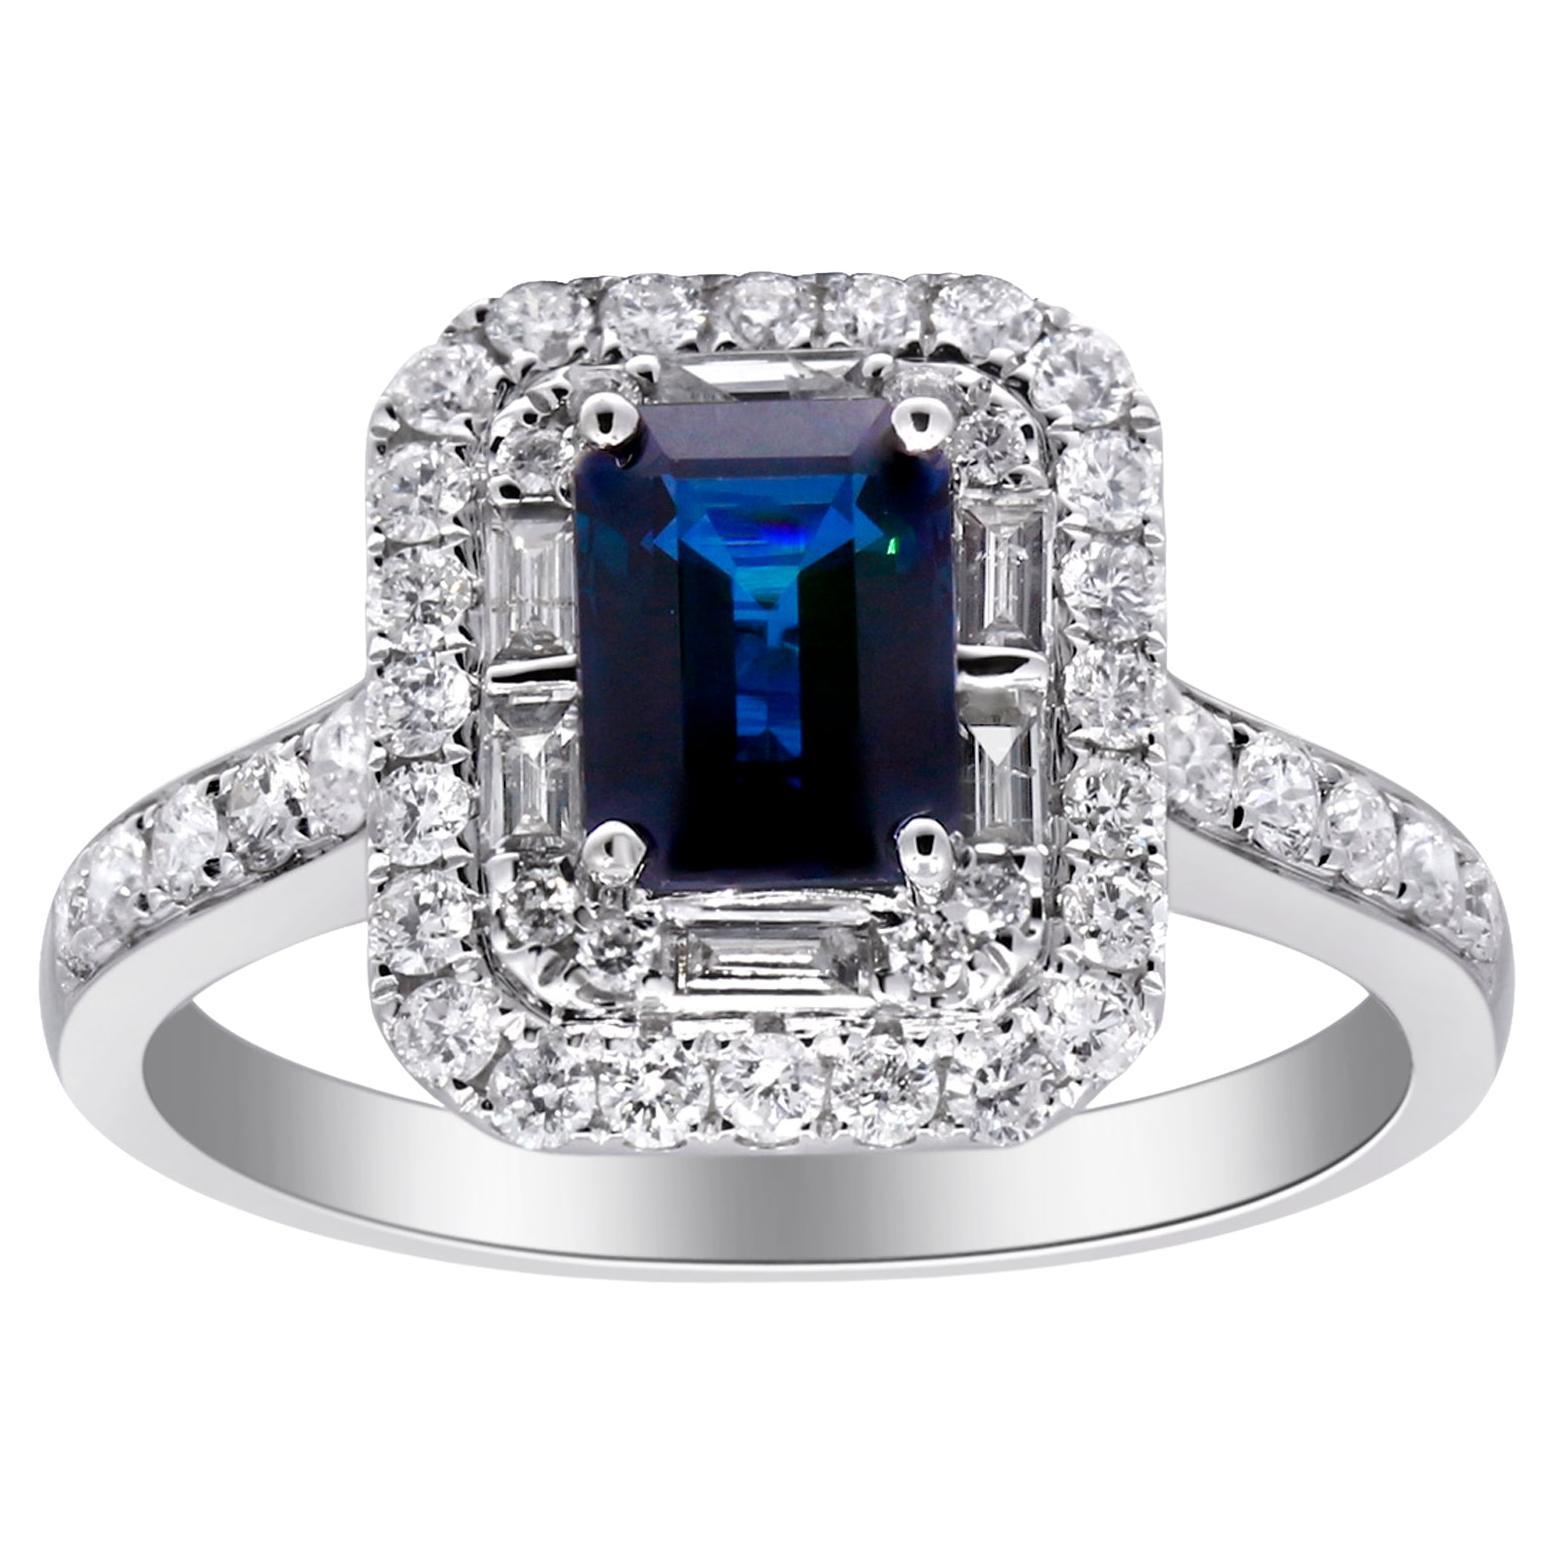 1.18 Carat Emerald-Cut Blue Sapphire with Diamond Accents 10K White Gold Ring